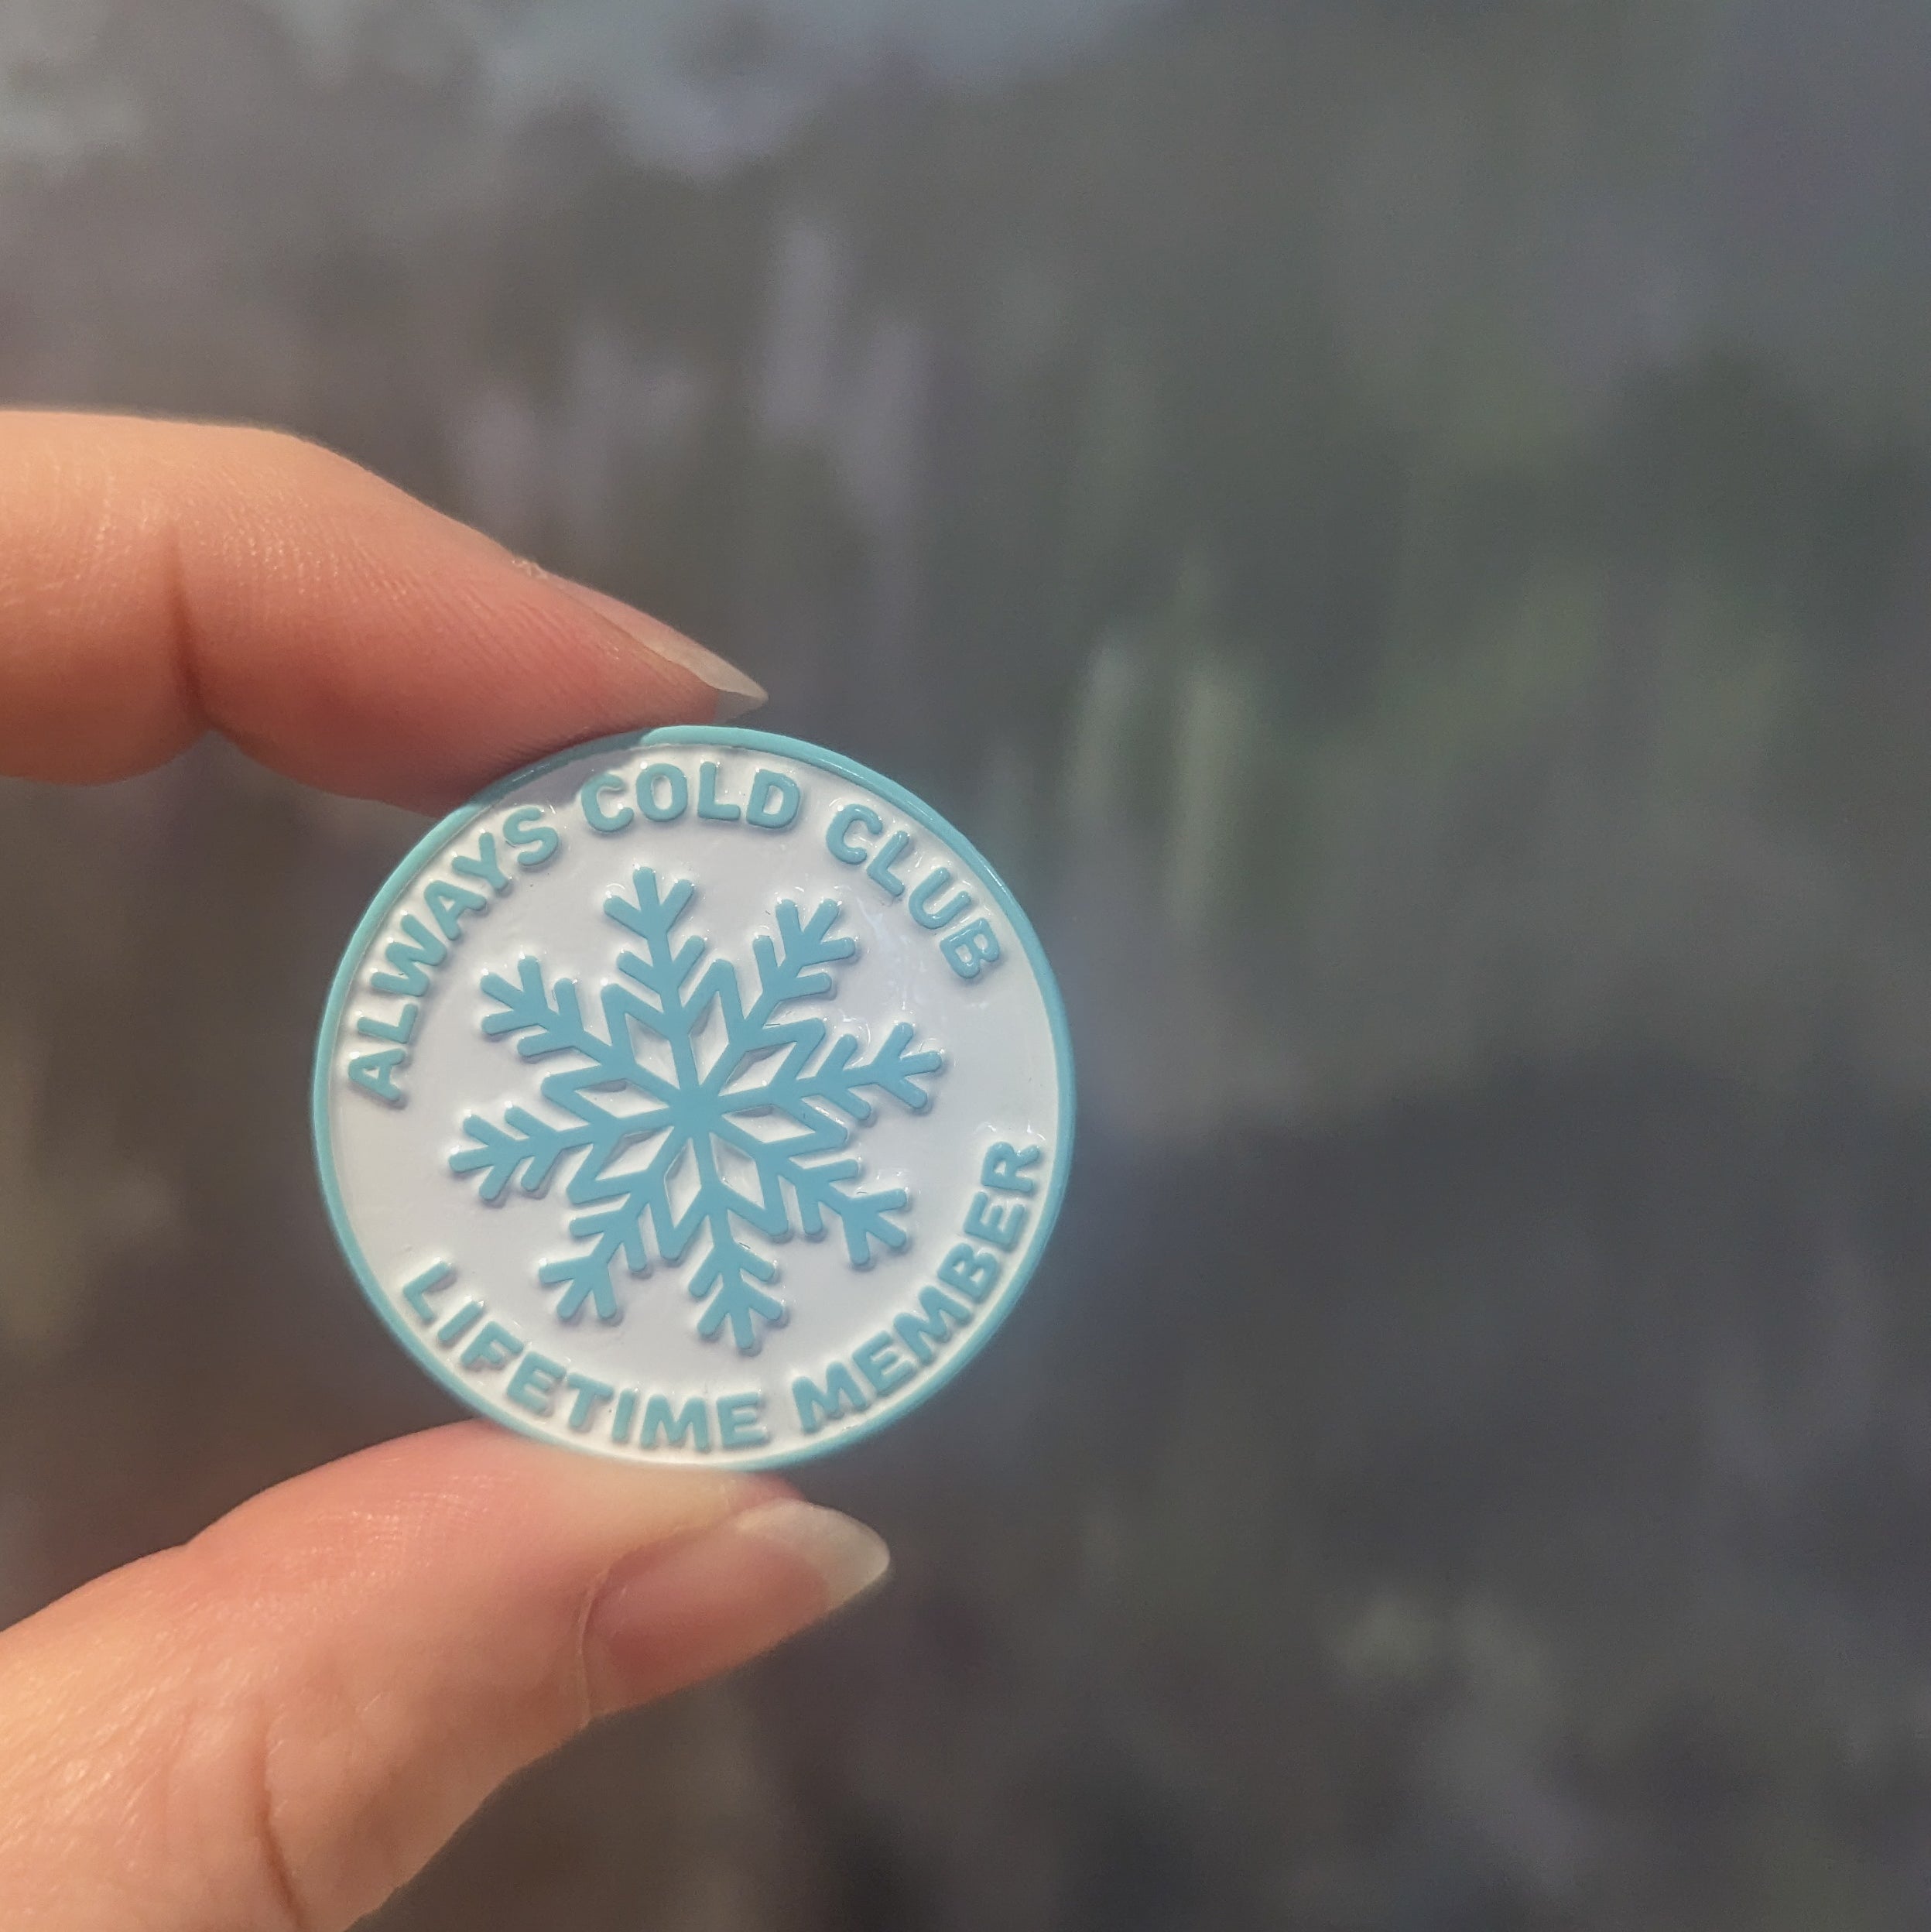 Always Cold Club soft enamel pin (first frost version)